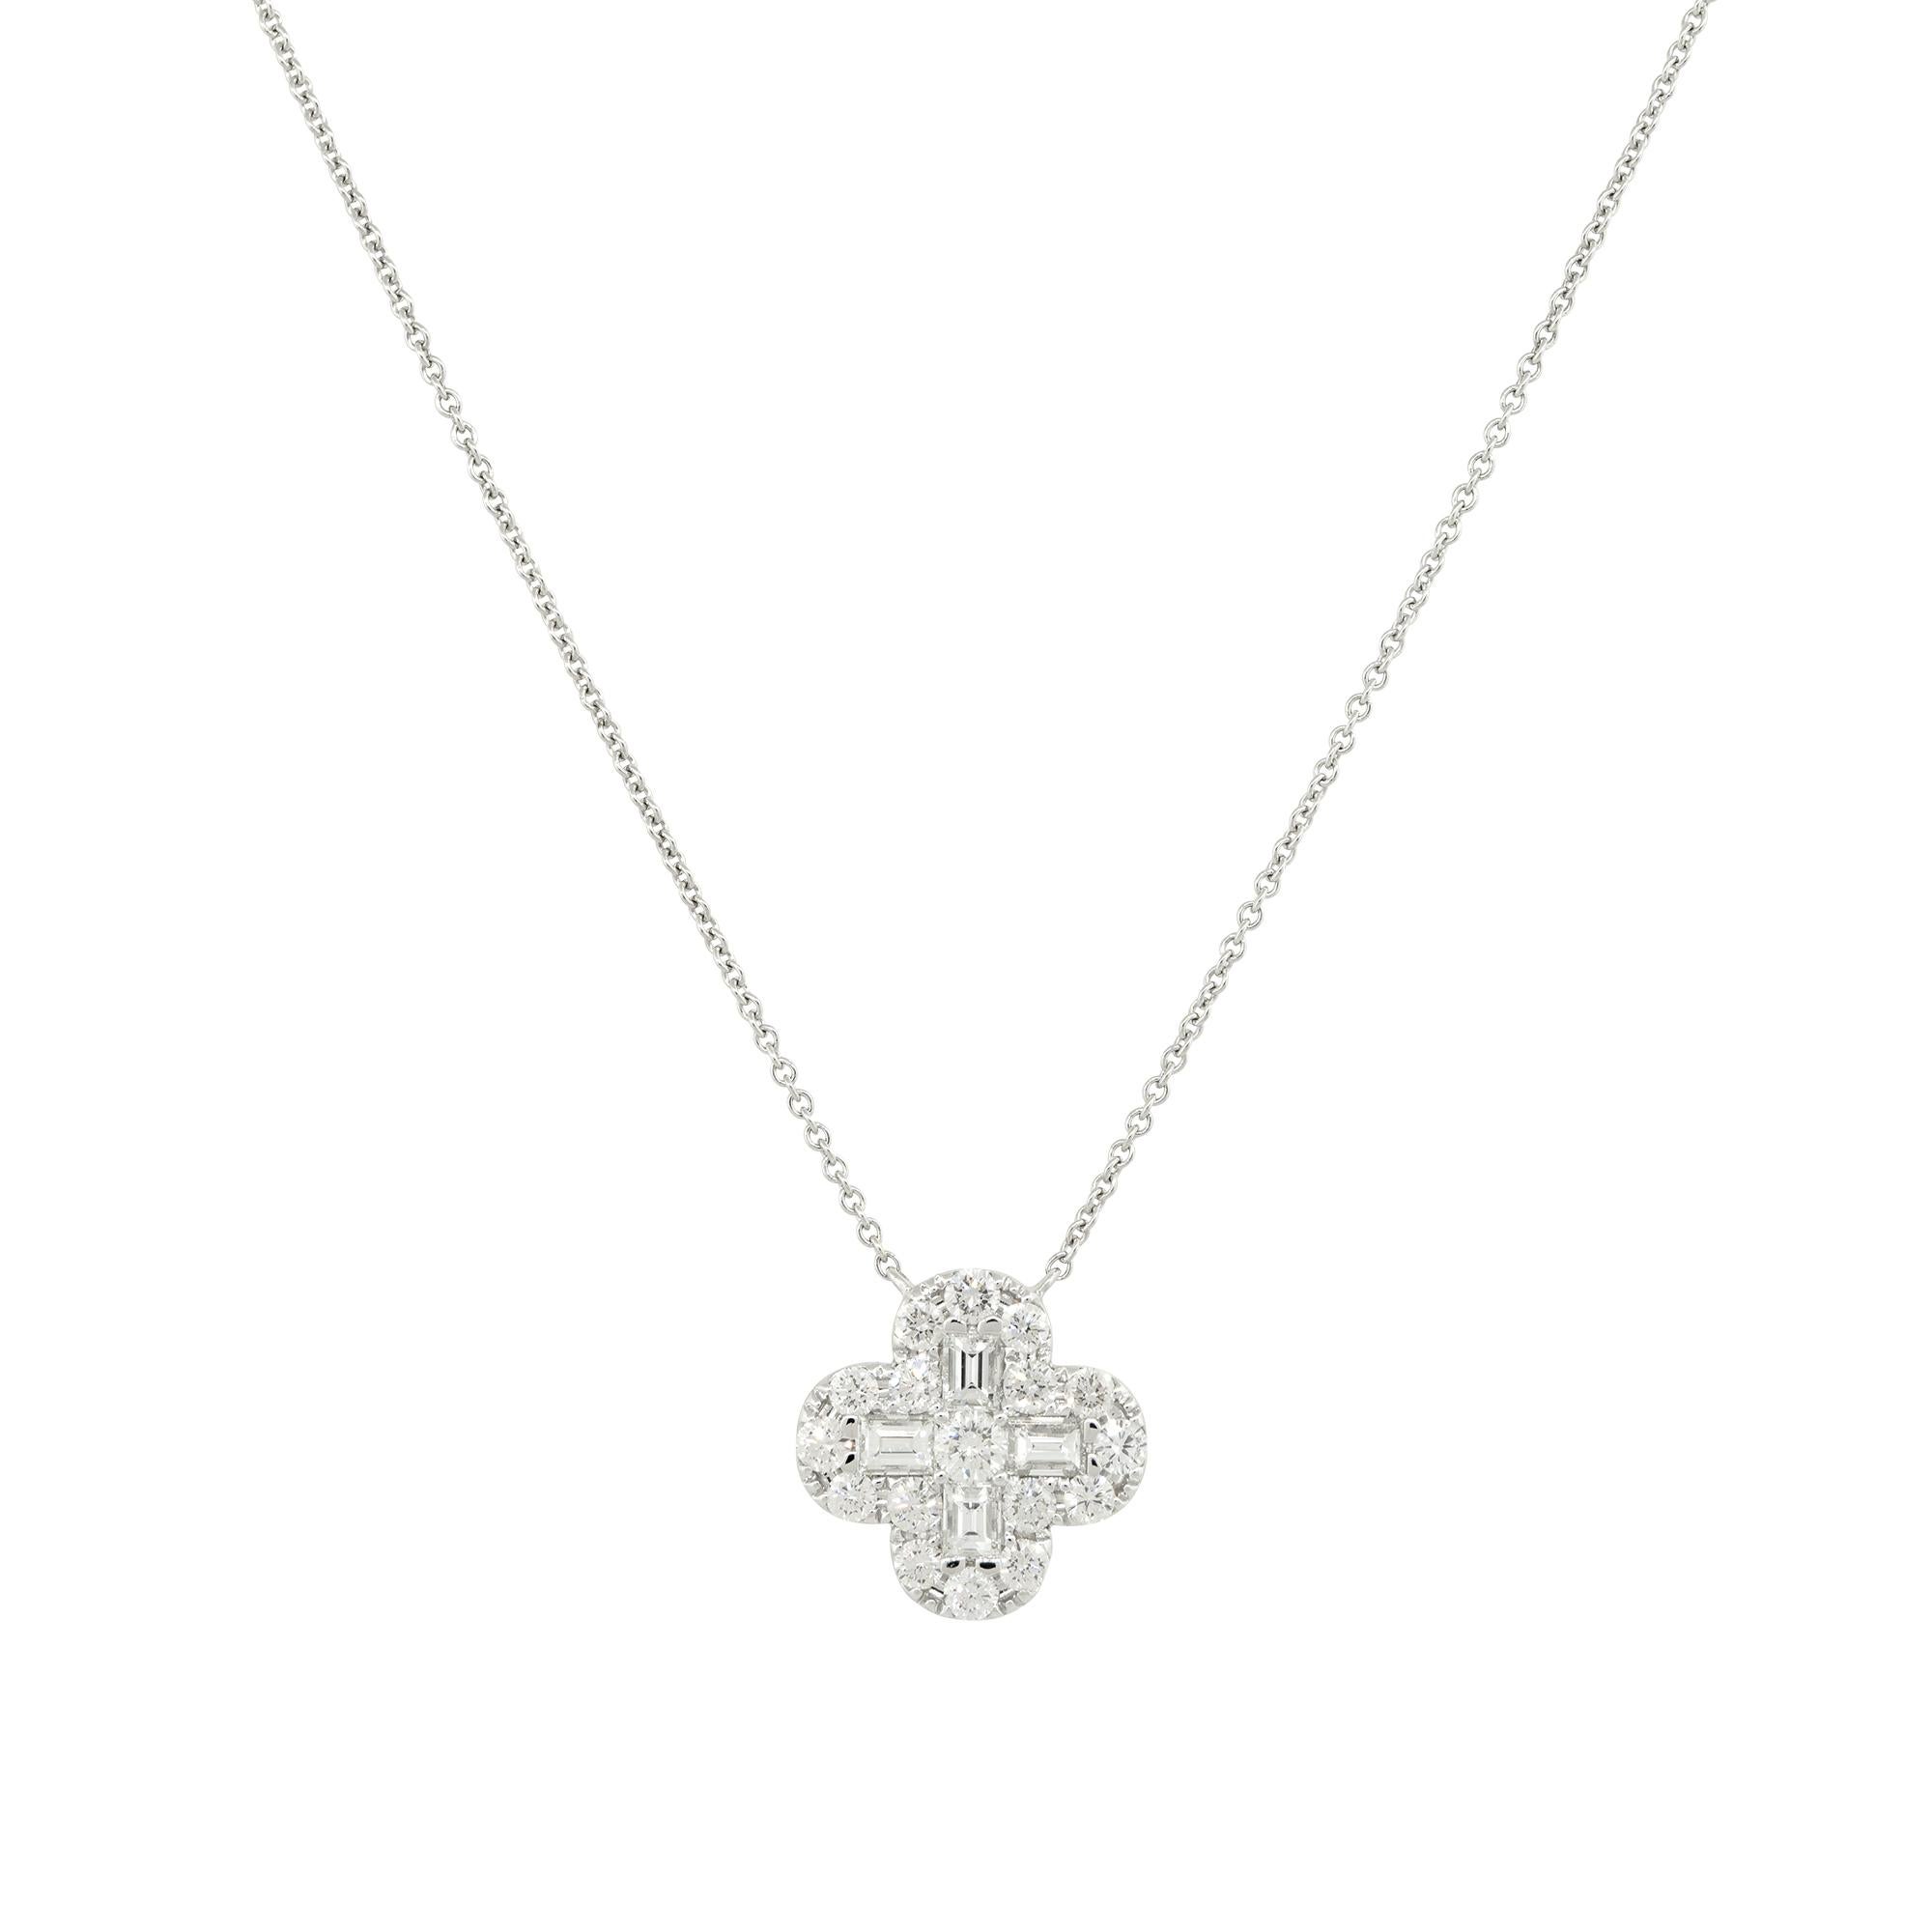 2.0 Carat Mosaic Diamond Clover Necklace 18 Karat in Stock In Excellent Condition For Sale In Boca Raton, FL